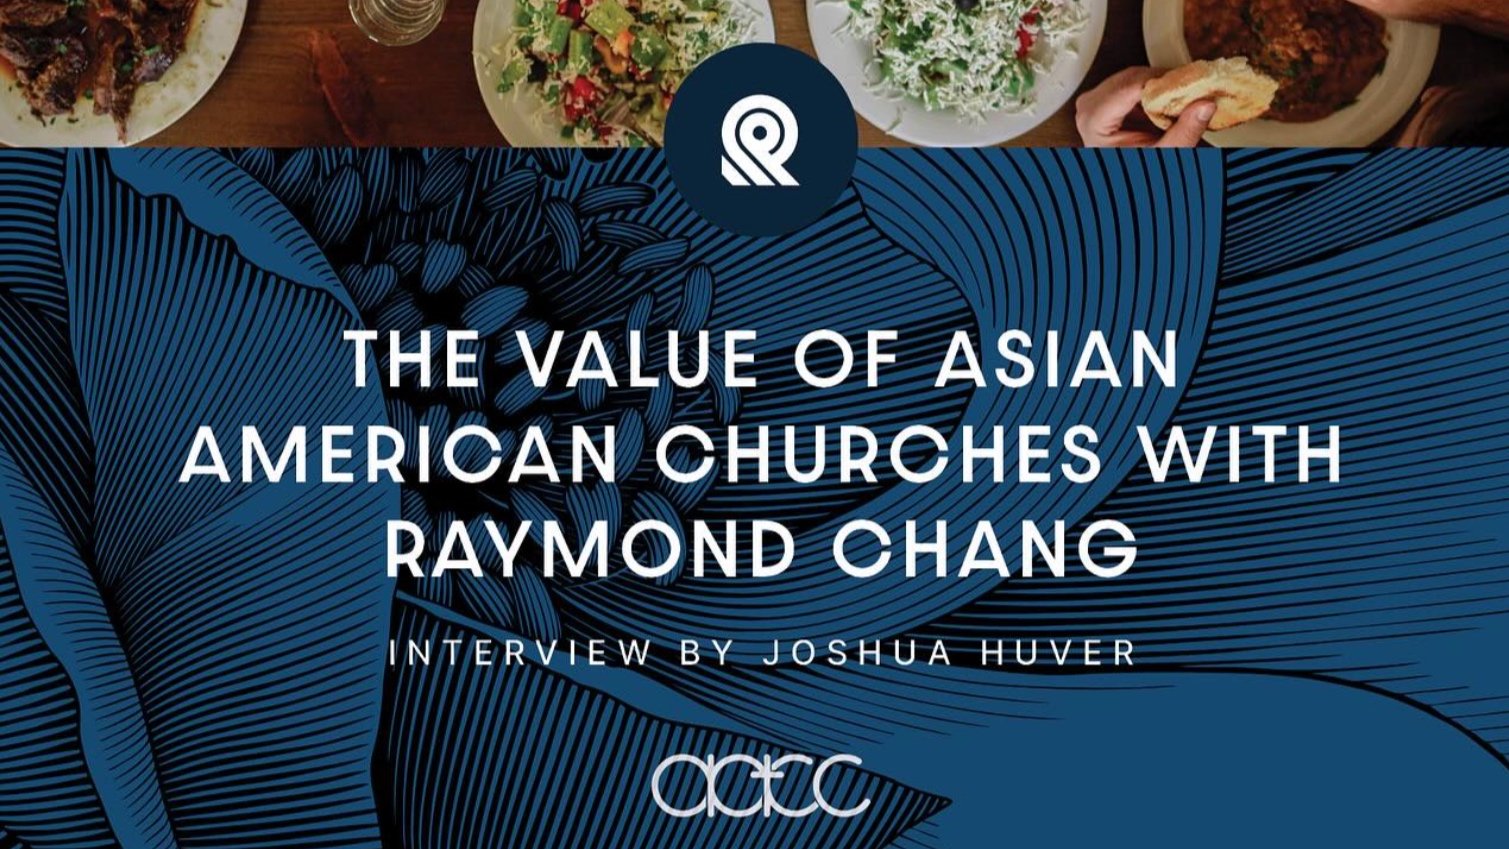 The value of Asian American Churches